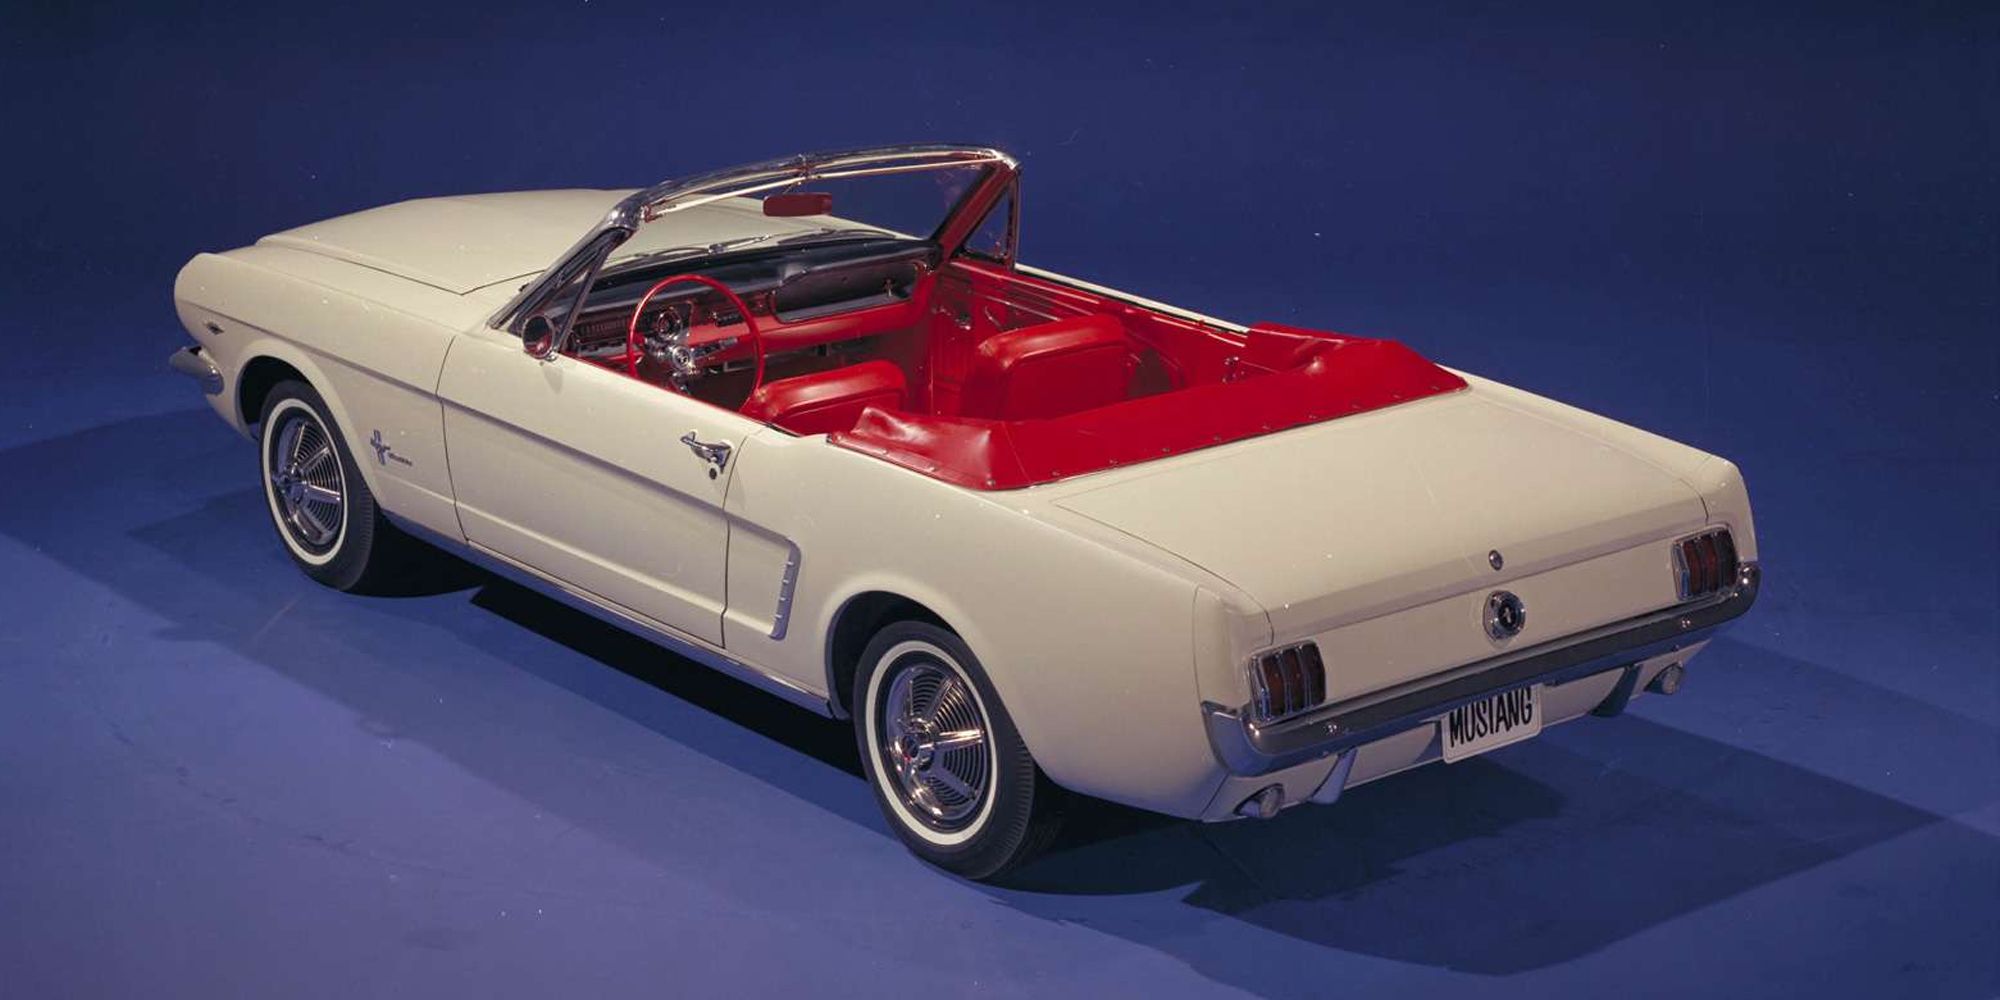 Rear 3/4 view of the '64 Mustang convertible